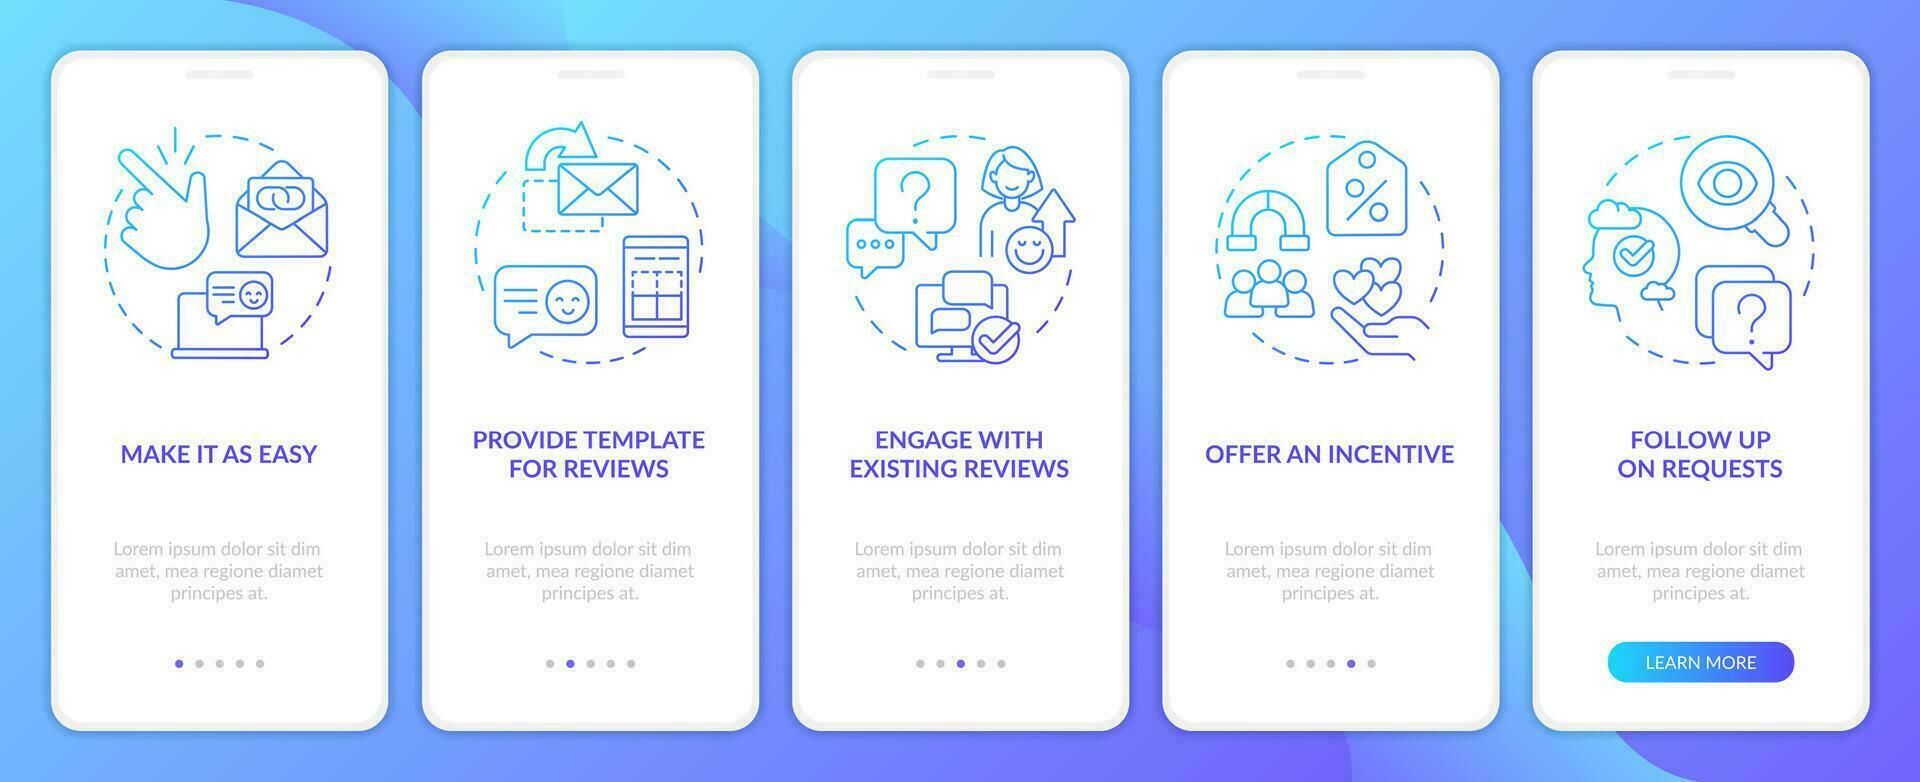 Motivating clients to give feedback blue gradient onboarding mobile app screen. Walkthrough 5 steps graphic instructions with linear concepts. UI, UX, GUI template vector